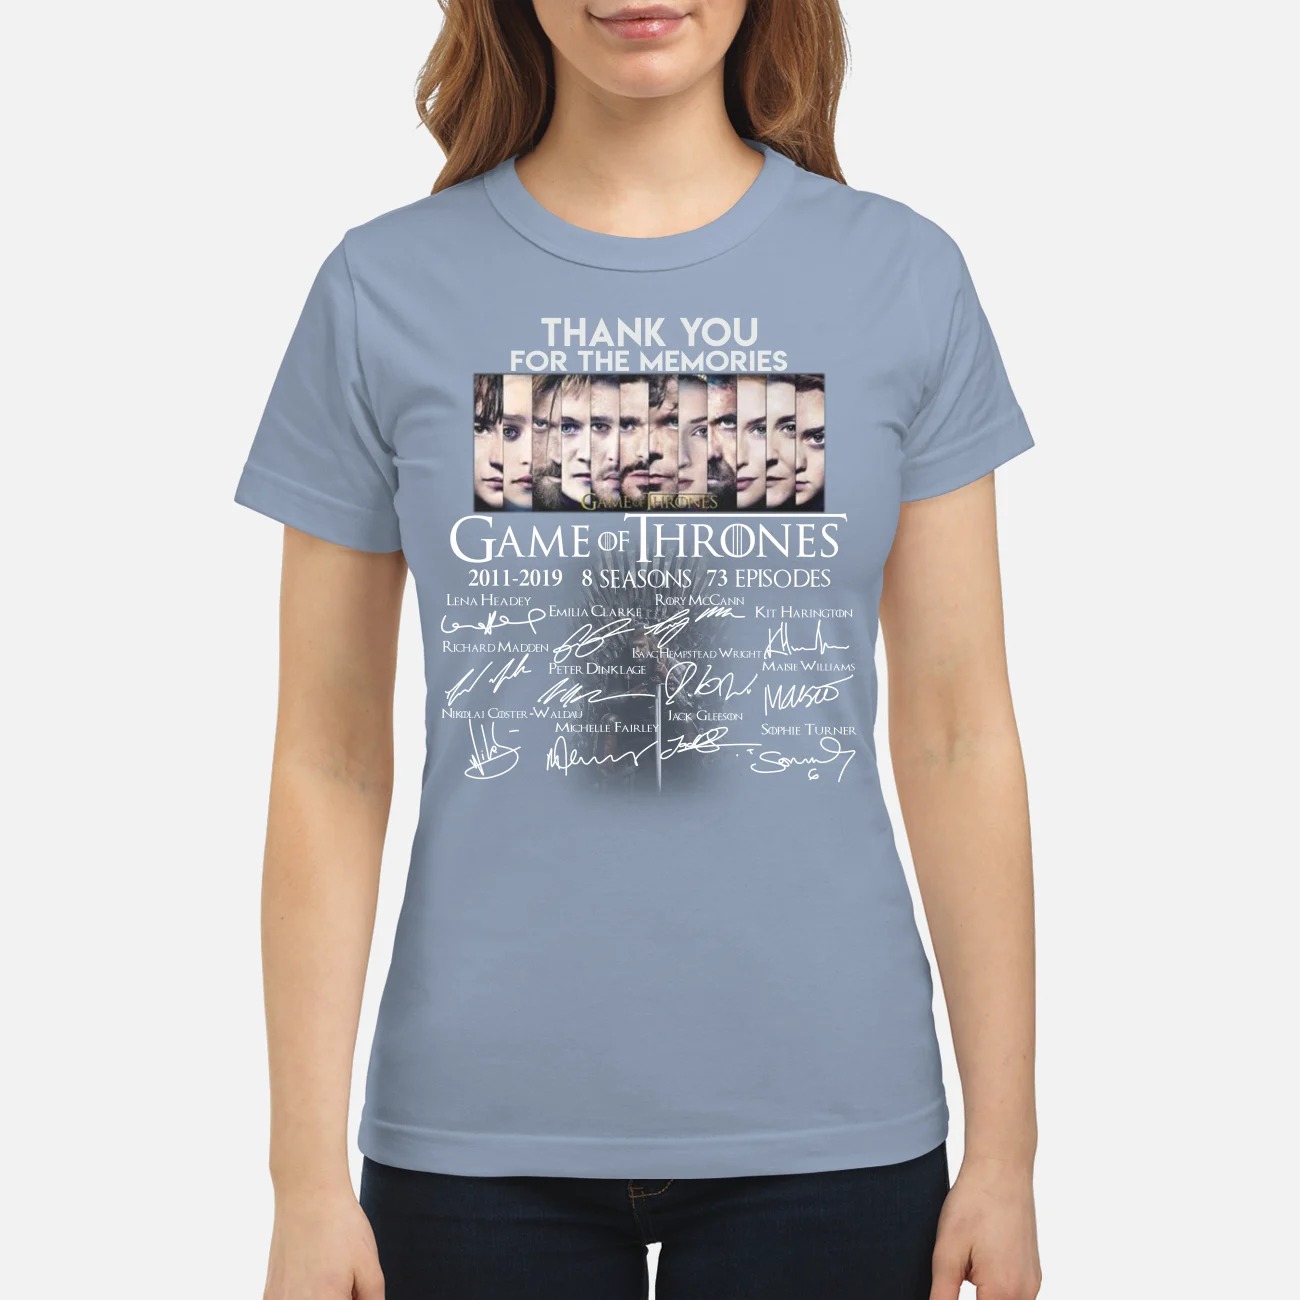 Thank you for the memories Game of Thrones classic shirt